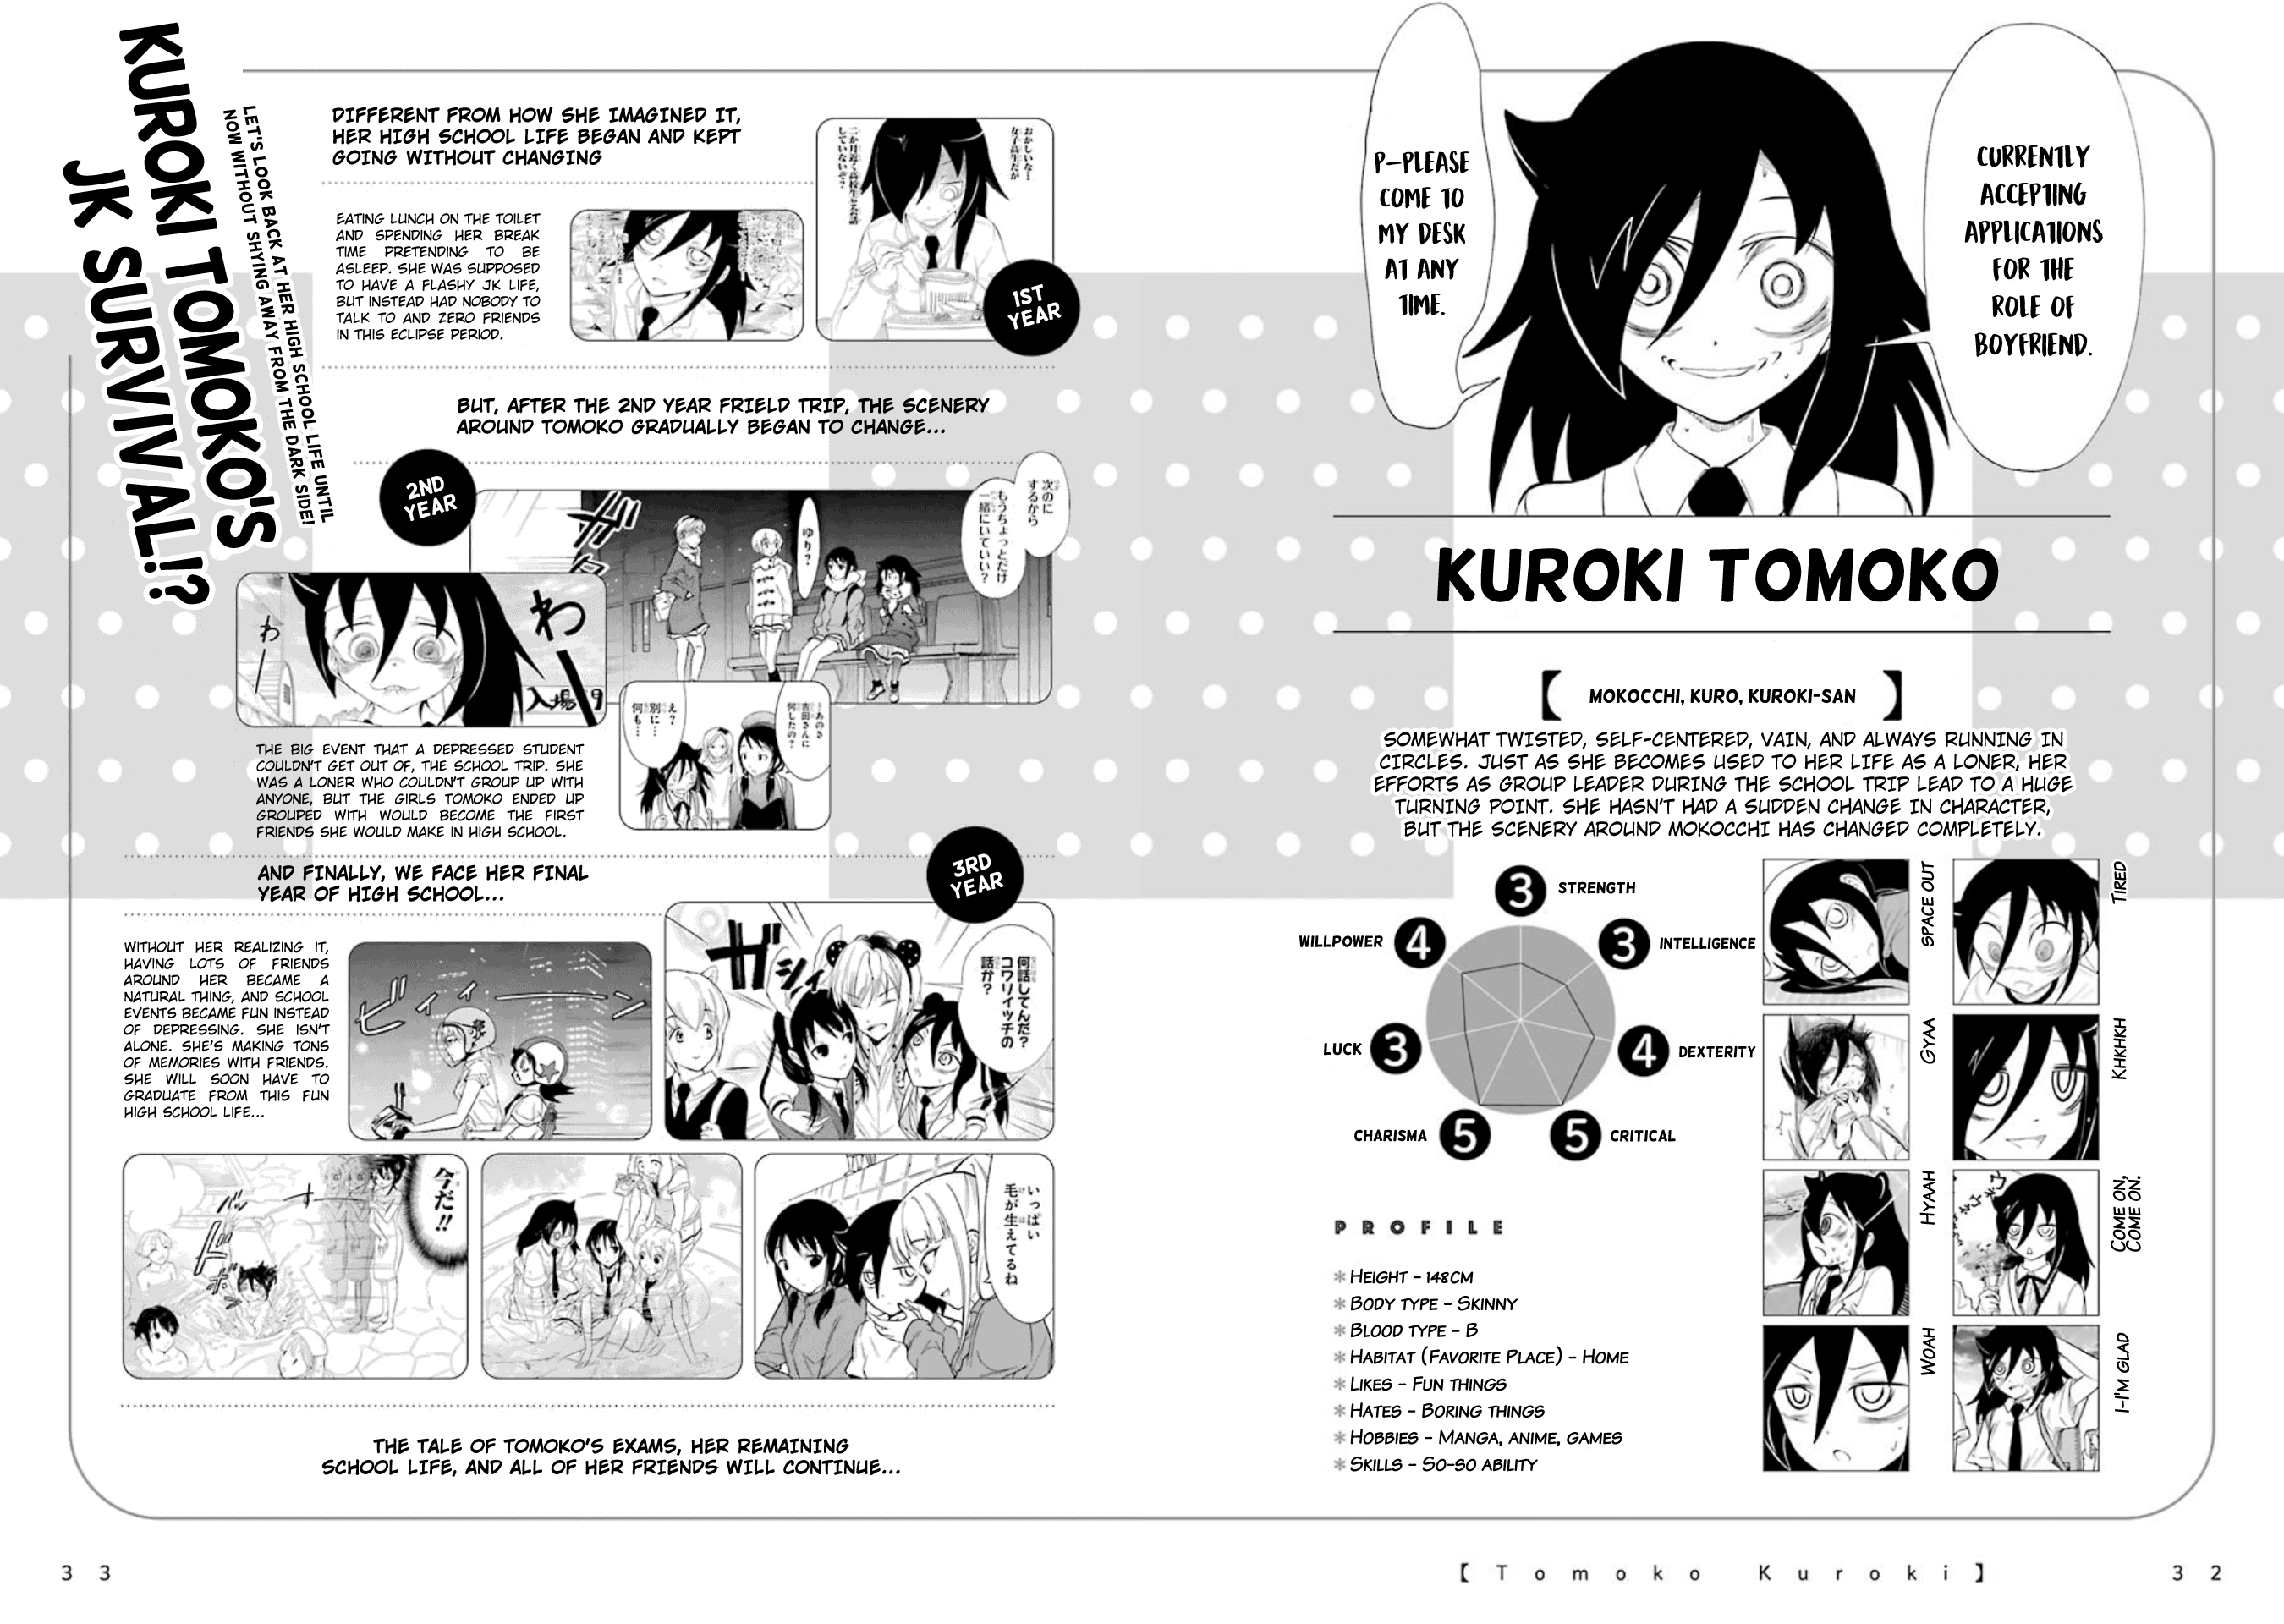 It's Not My Fault That I'm Not Popular! Vol.18 Chapter 176.6: Volume 18 Special Edition Booklet: Character Introductions - Picture 3